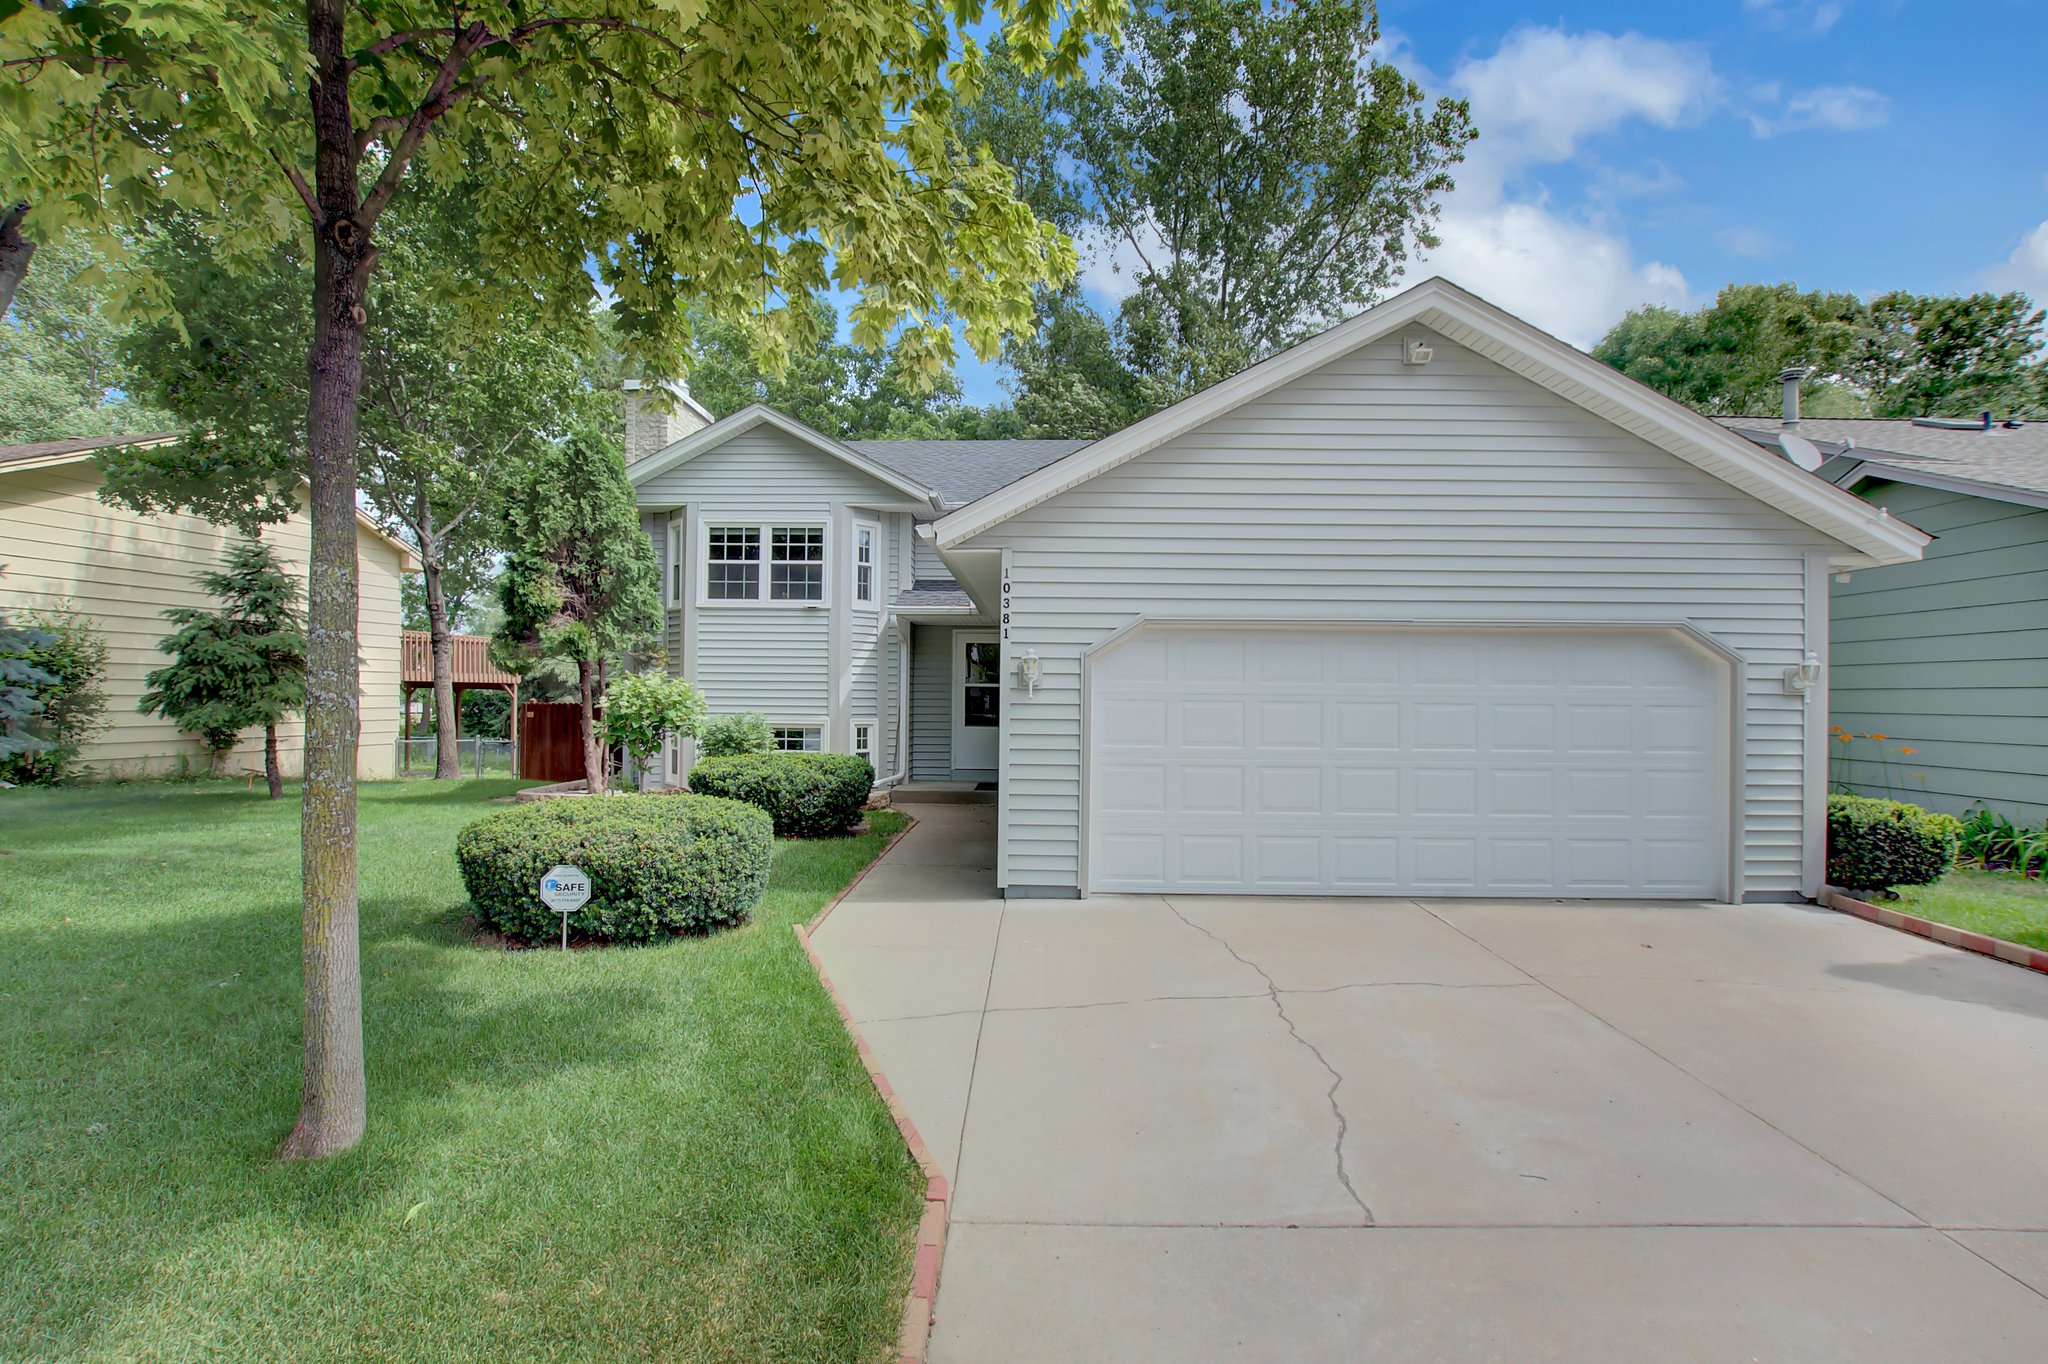  10381 Avocet St NW, Coon Rapids, MN 55433, US Photo 2